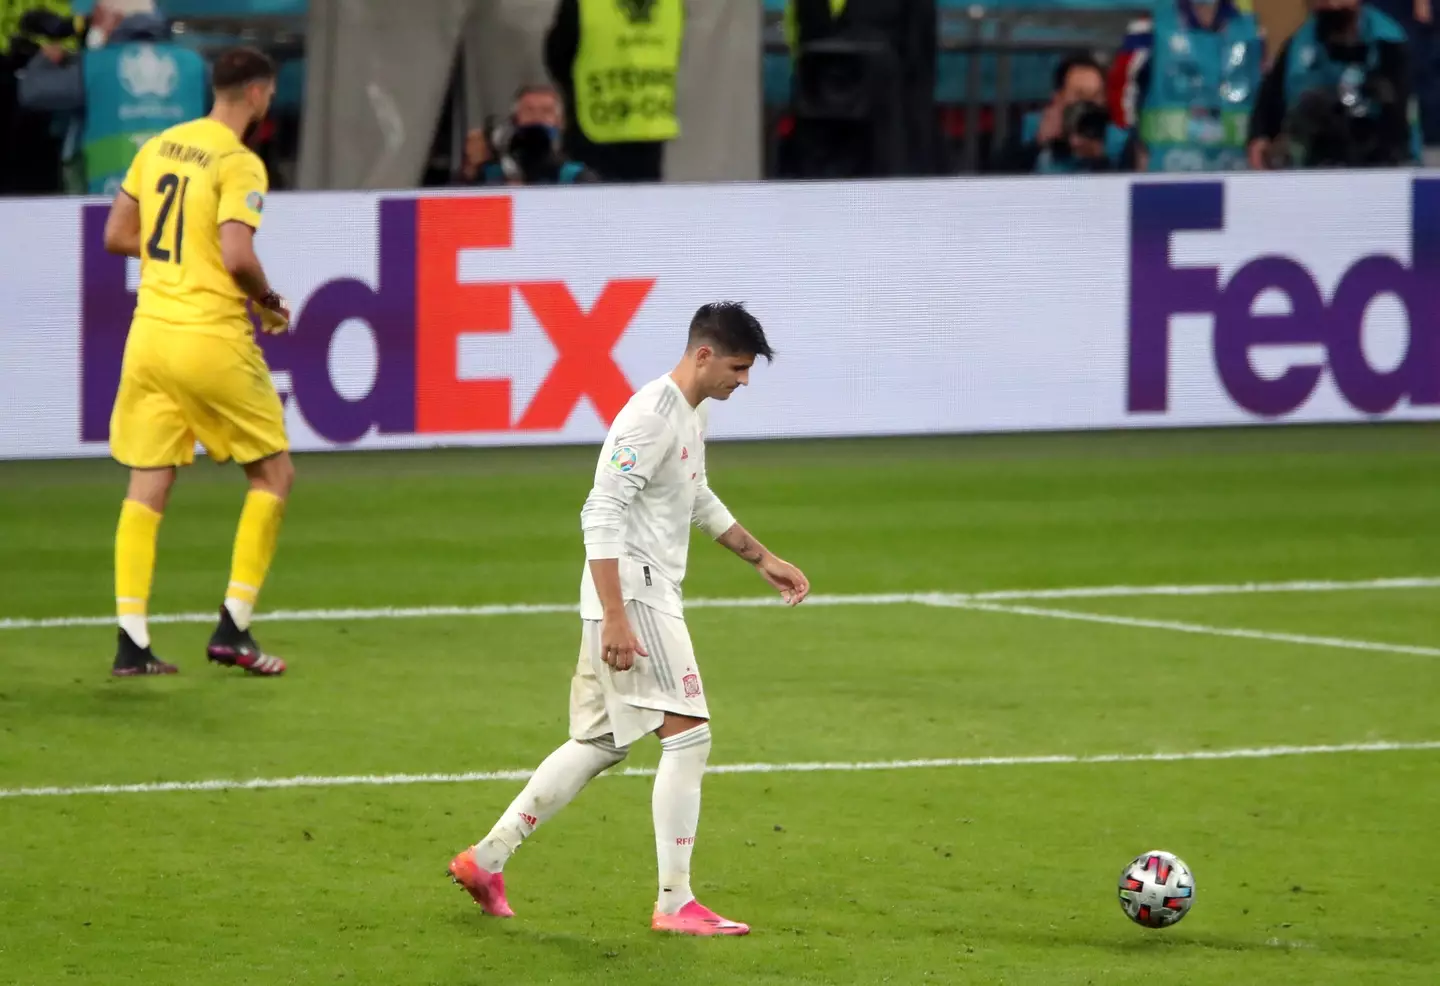 Morata scored in the Euro 2020 semi final but then missed the decisive penalty. Image: PA Images